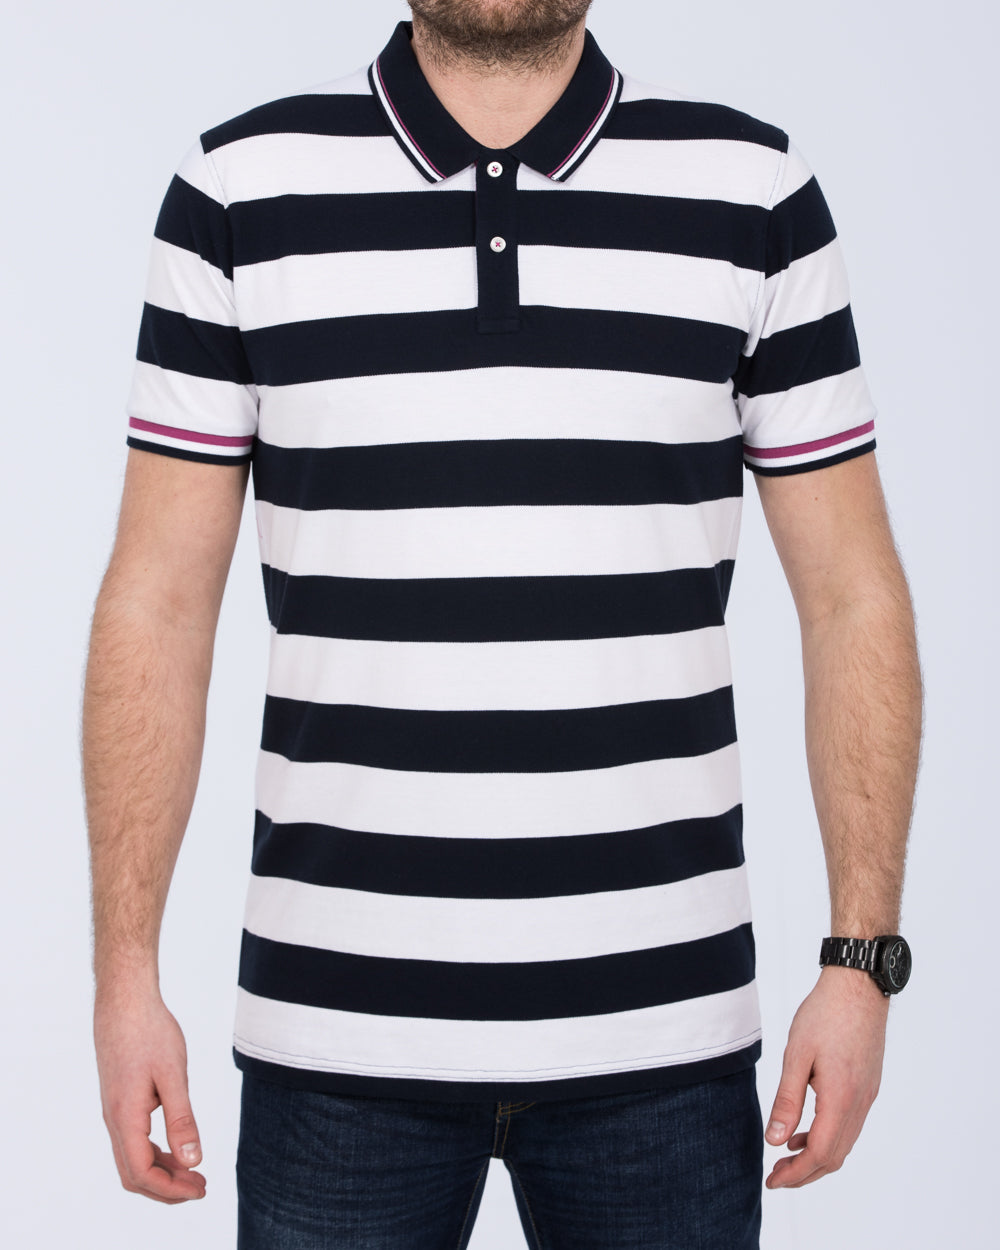 2t Slim Fit Tall Striped Polo Shirt (navy/white)